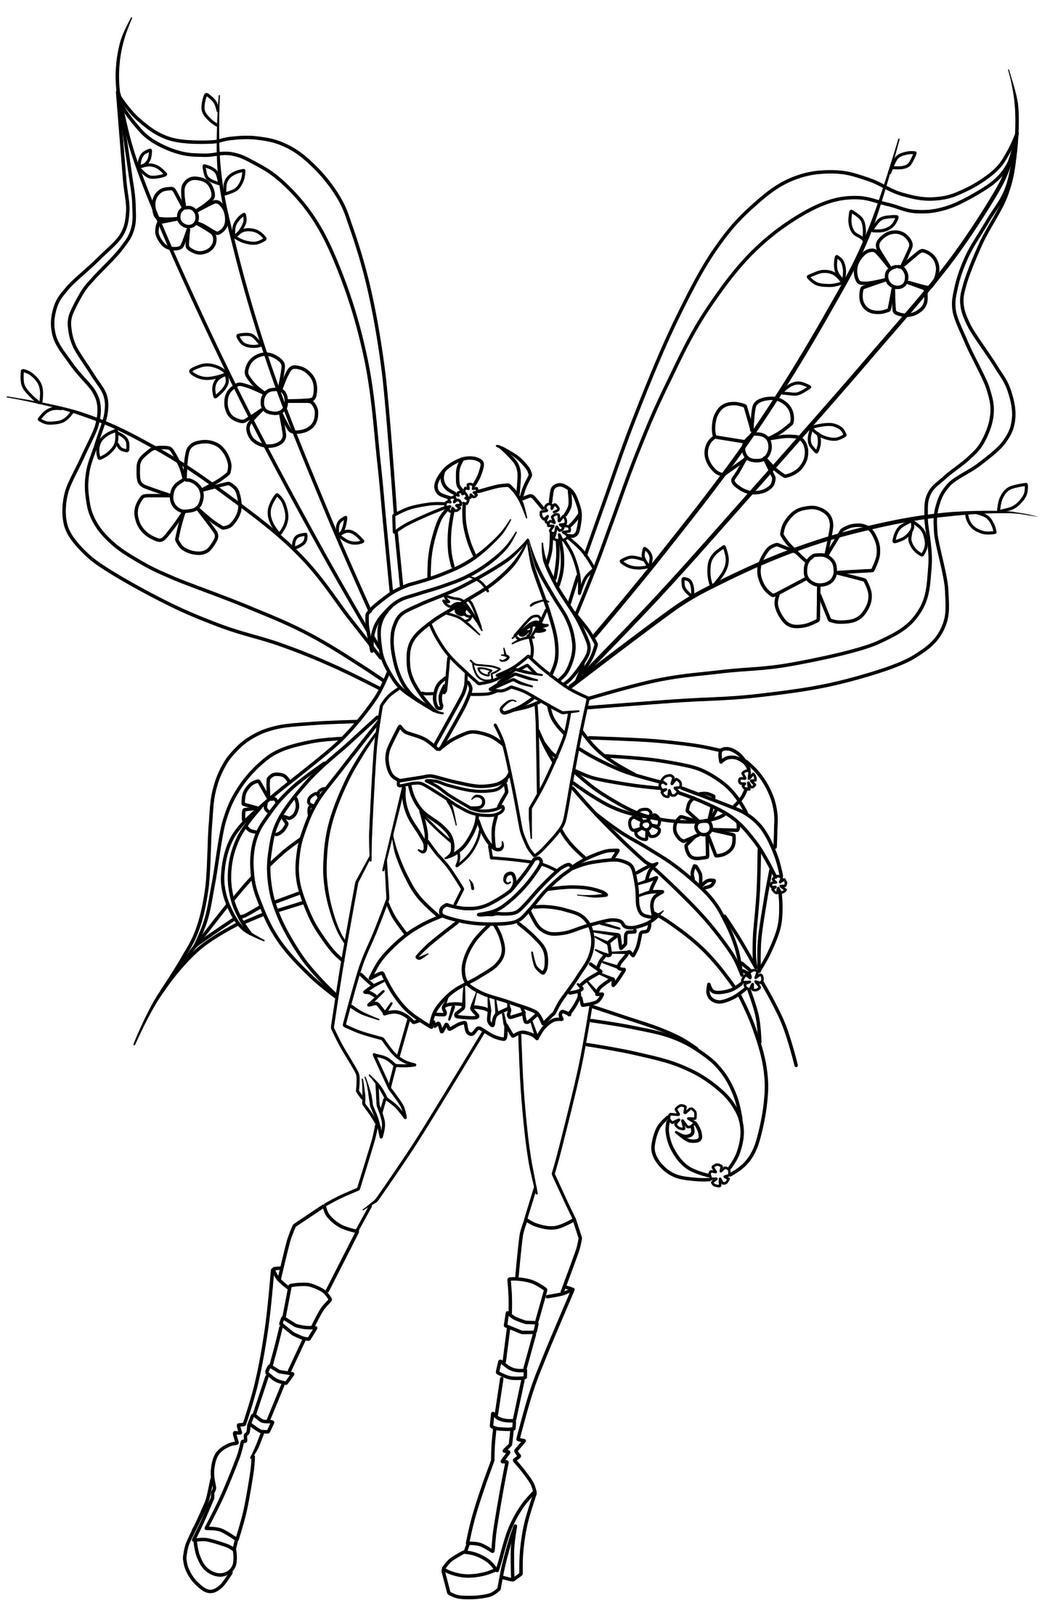 winx club coloring pages | Only Coloring Pages